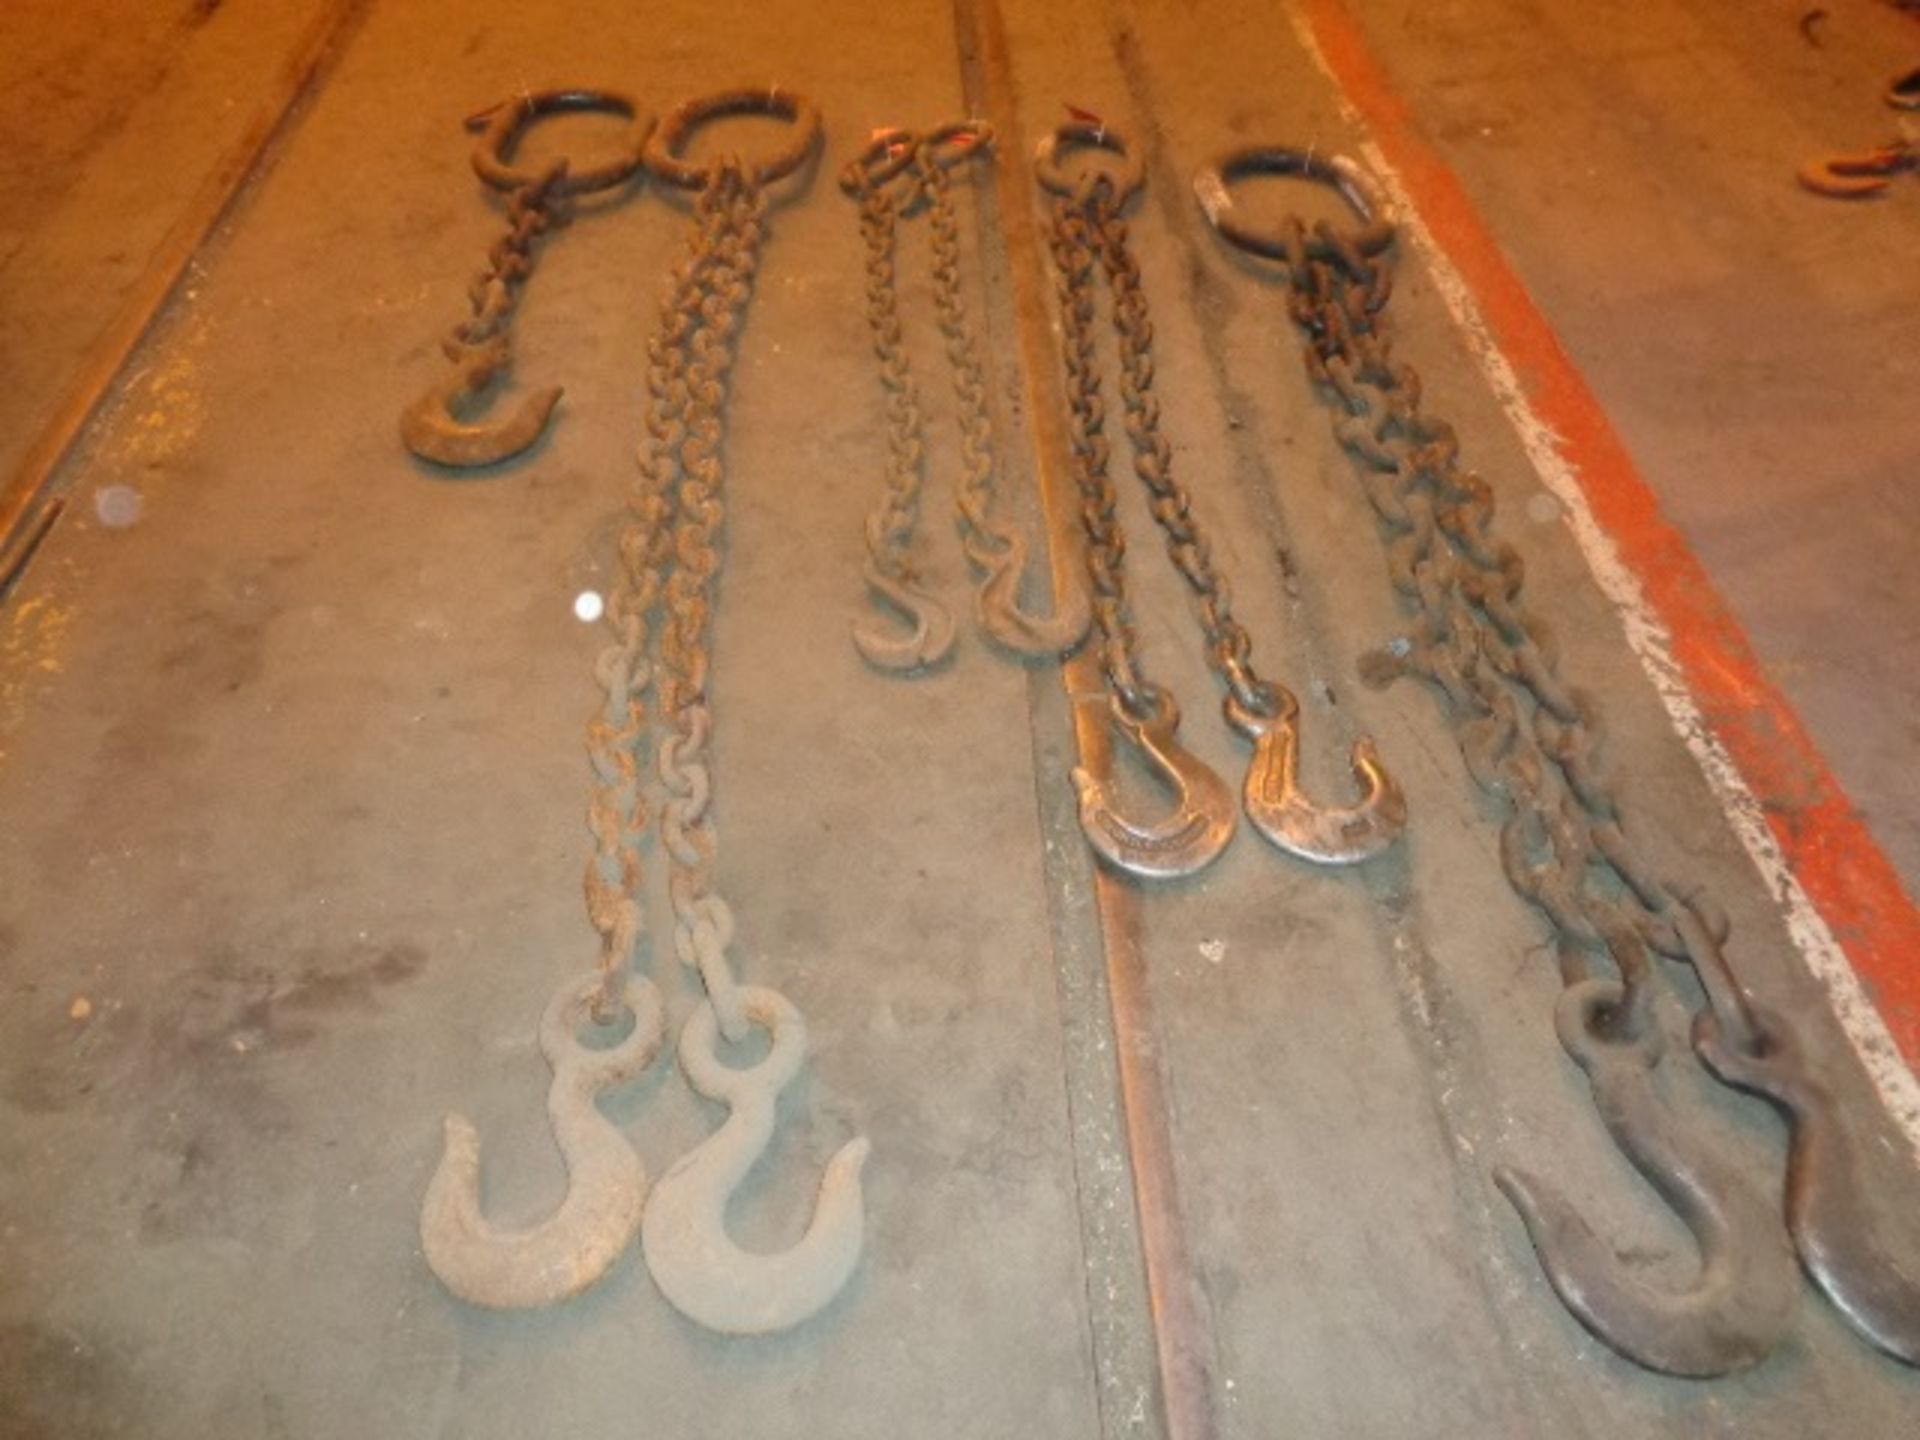 Lot of 6 Chains - Inventory # 116A - Image 2 of 10